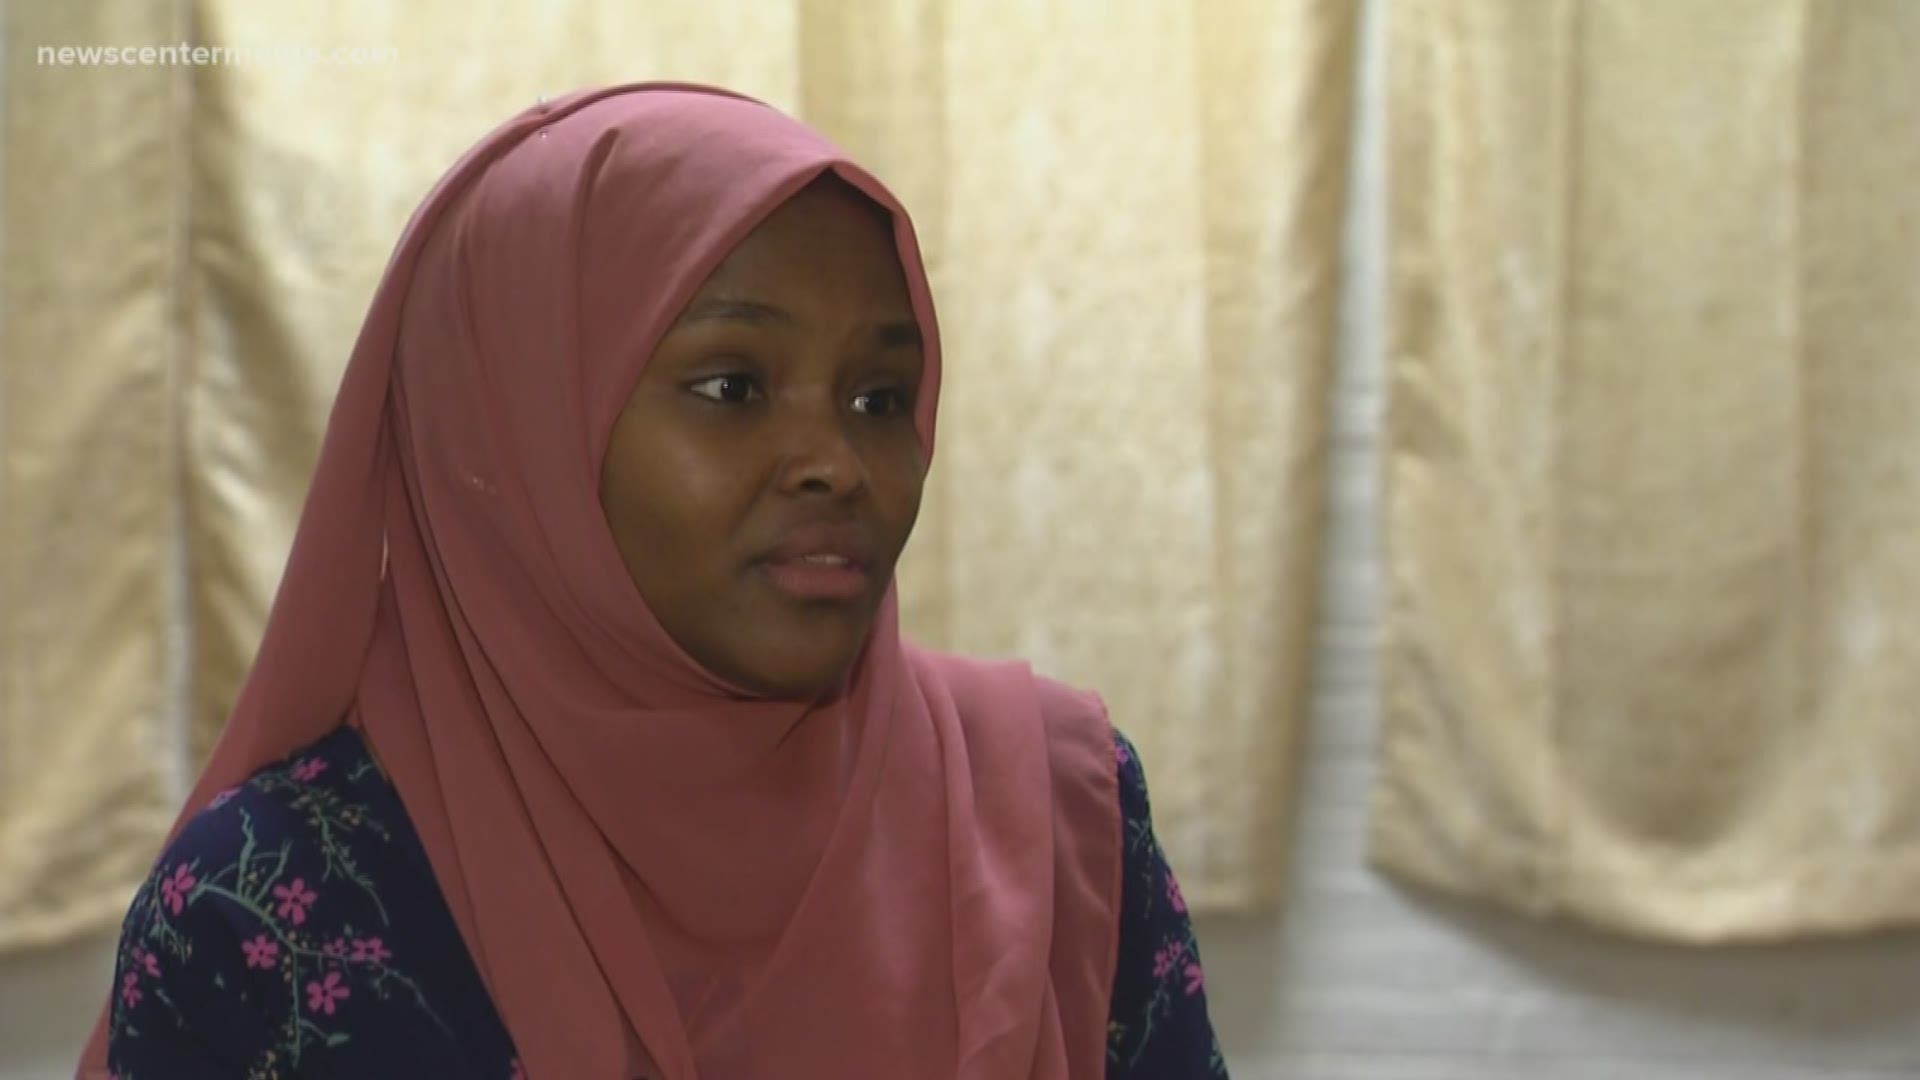 The city of Lewiston elects 23-year-old Safiya Khalid to city council, making her the youngest and first Somali-American person to serve on the city council